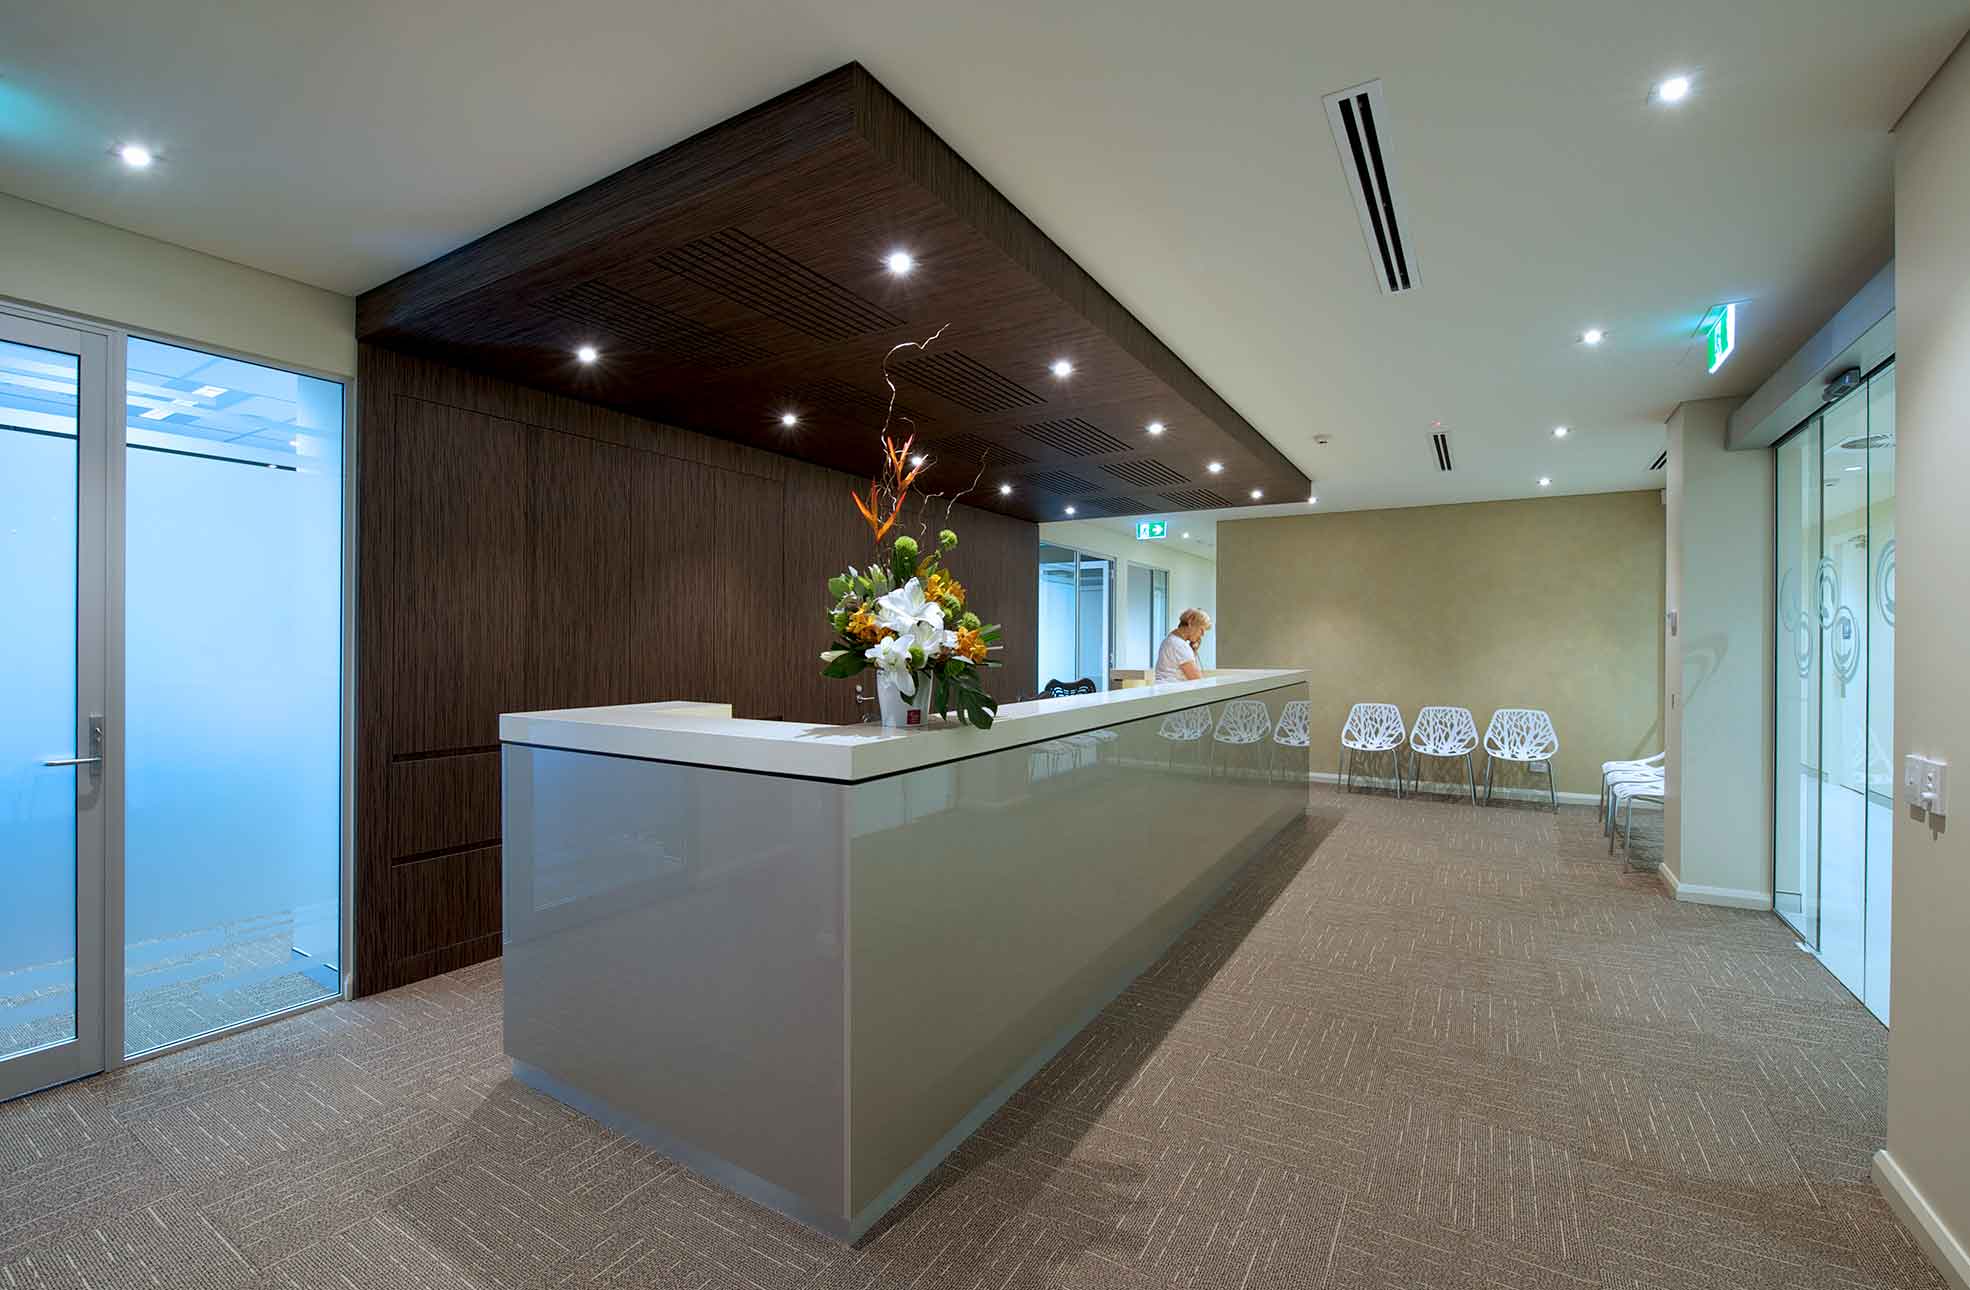 Medical fitout & suite with long white reception desk, waiting room chairs